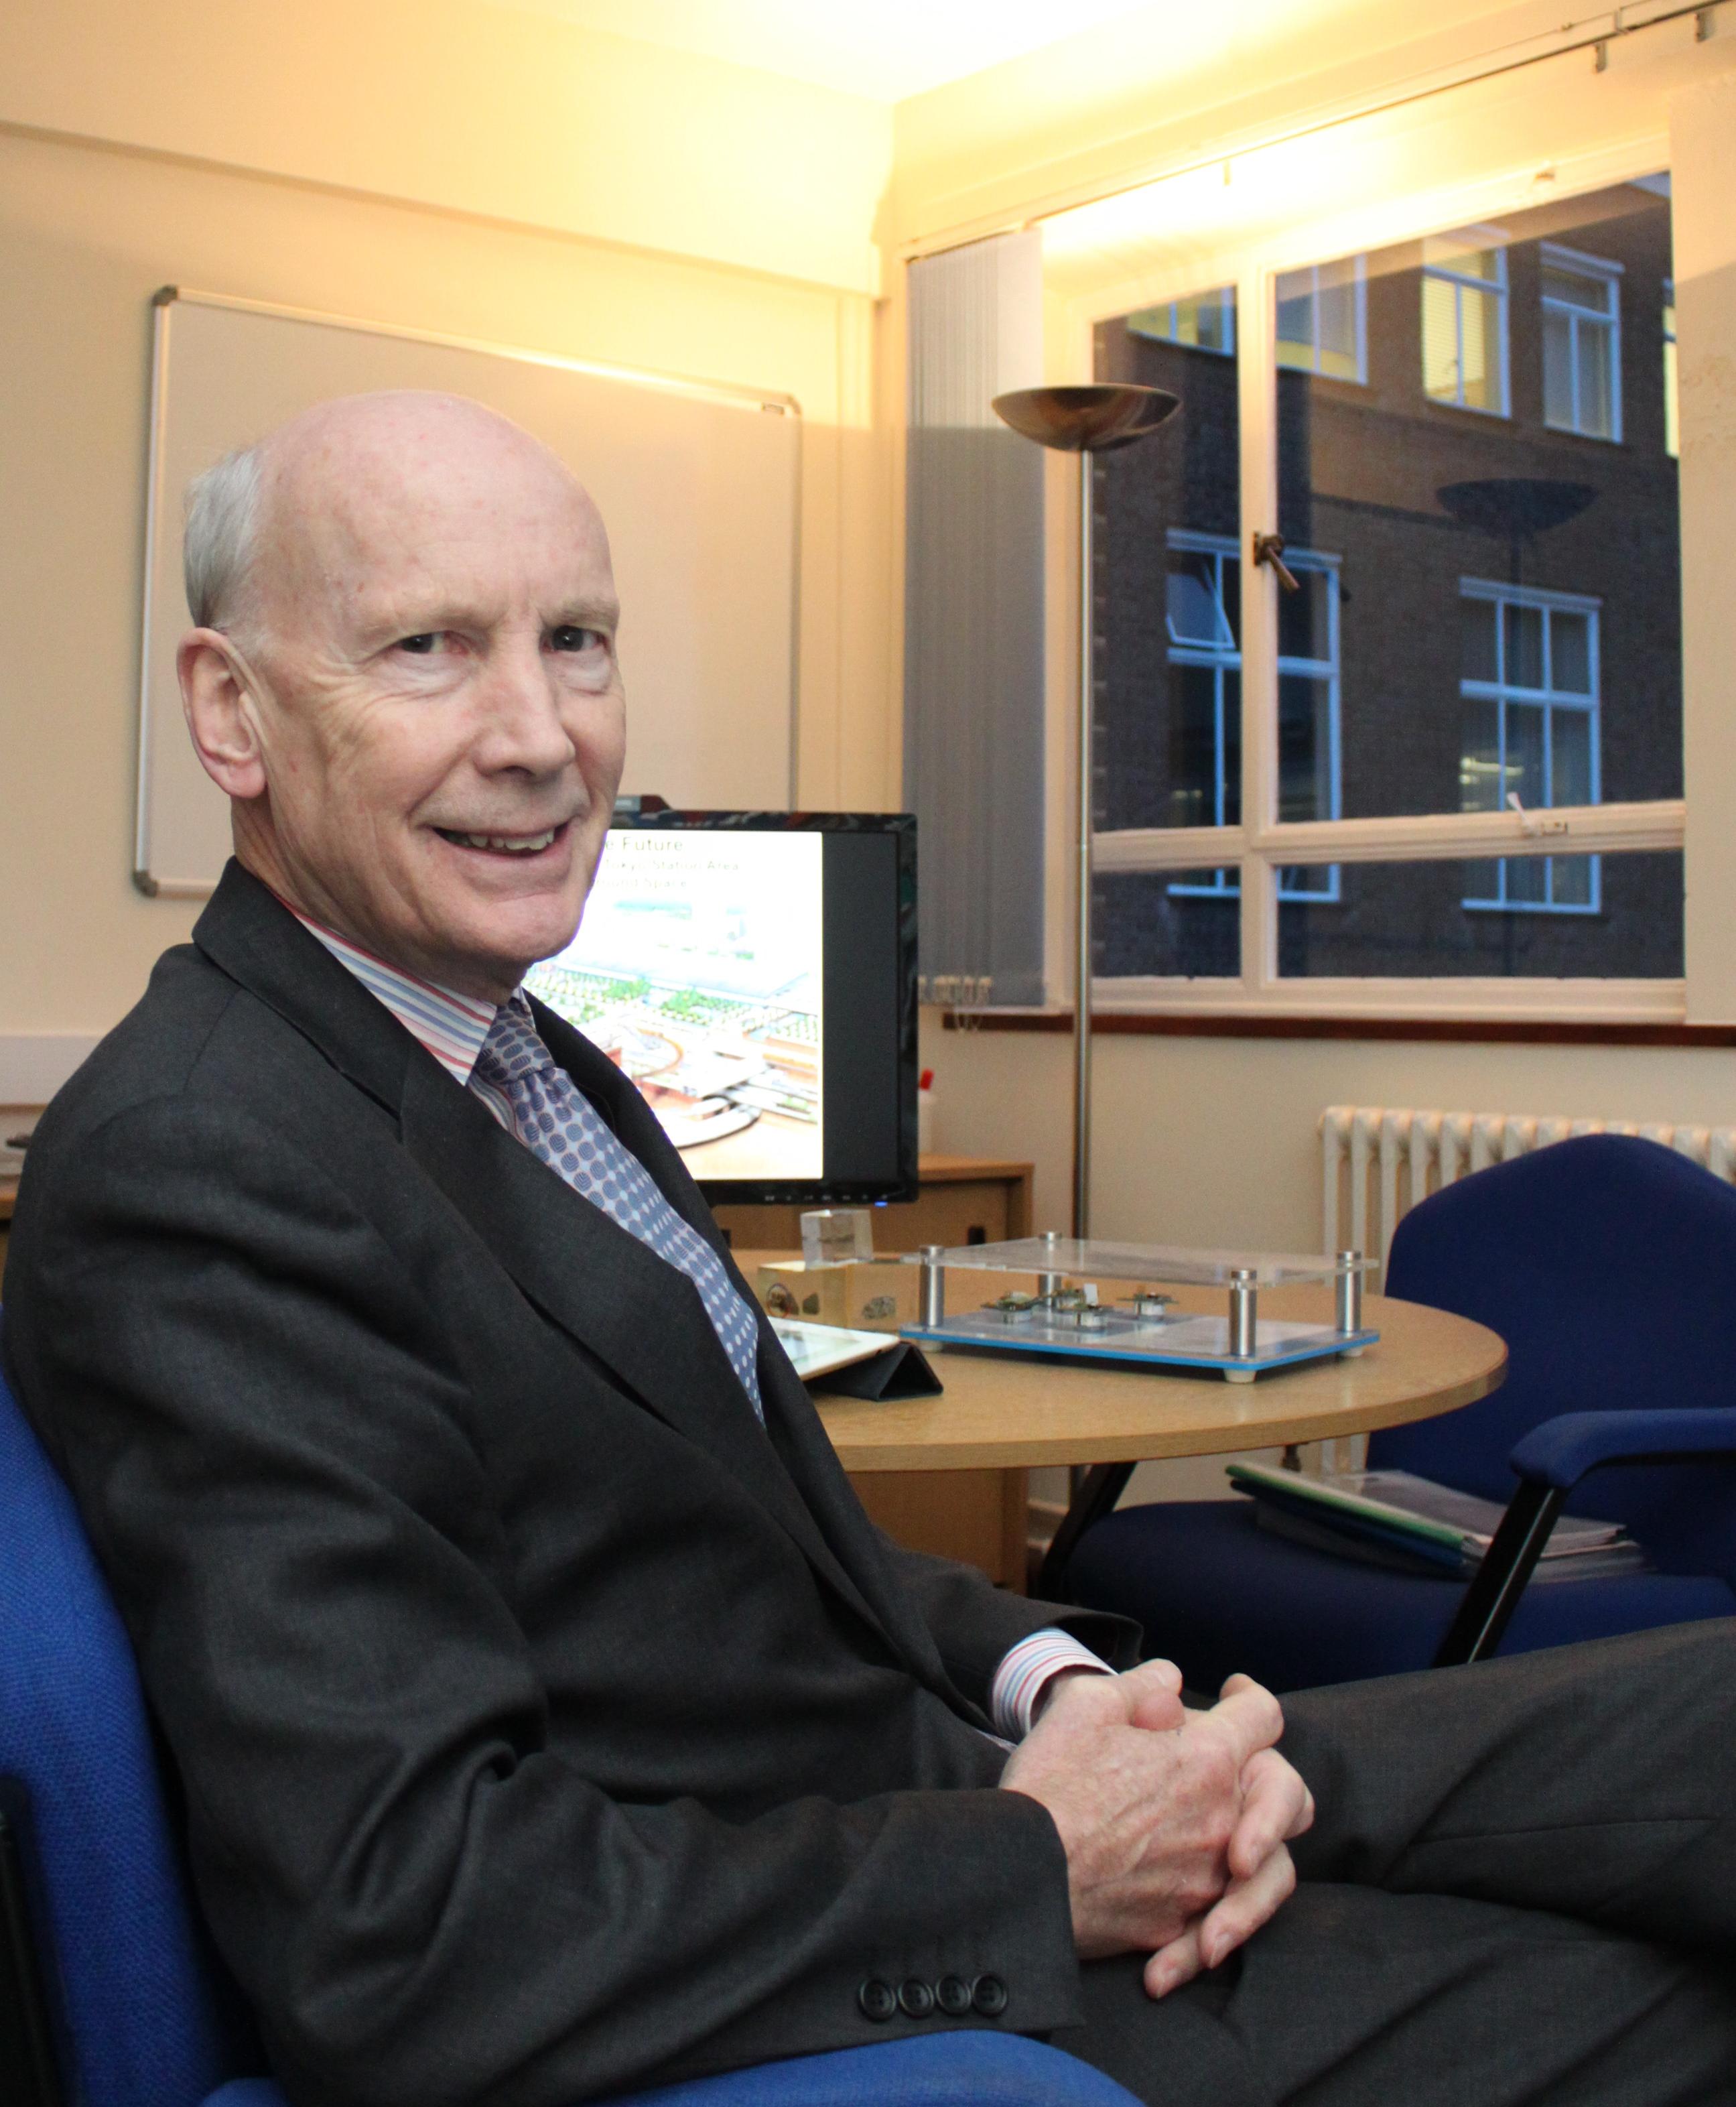 CSIC’s Head, Professor Robert Mair to join the Institution of Civil Engineer’s (ICE) Presidential Team for 2014/15